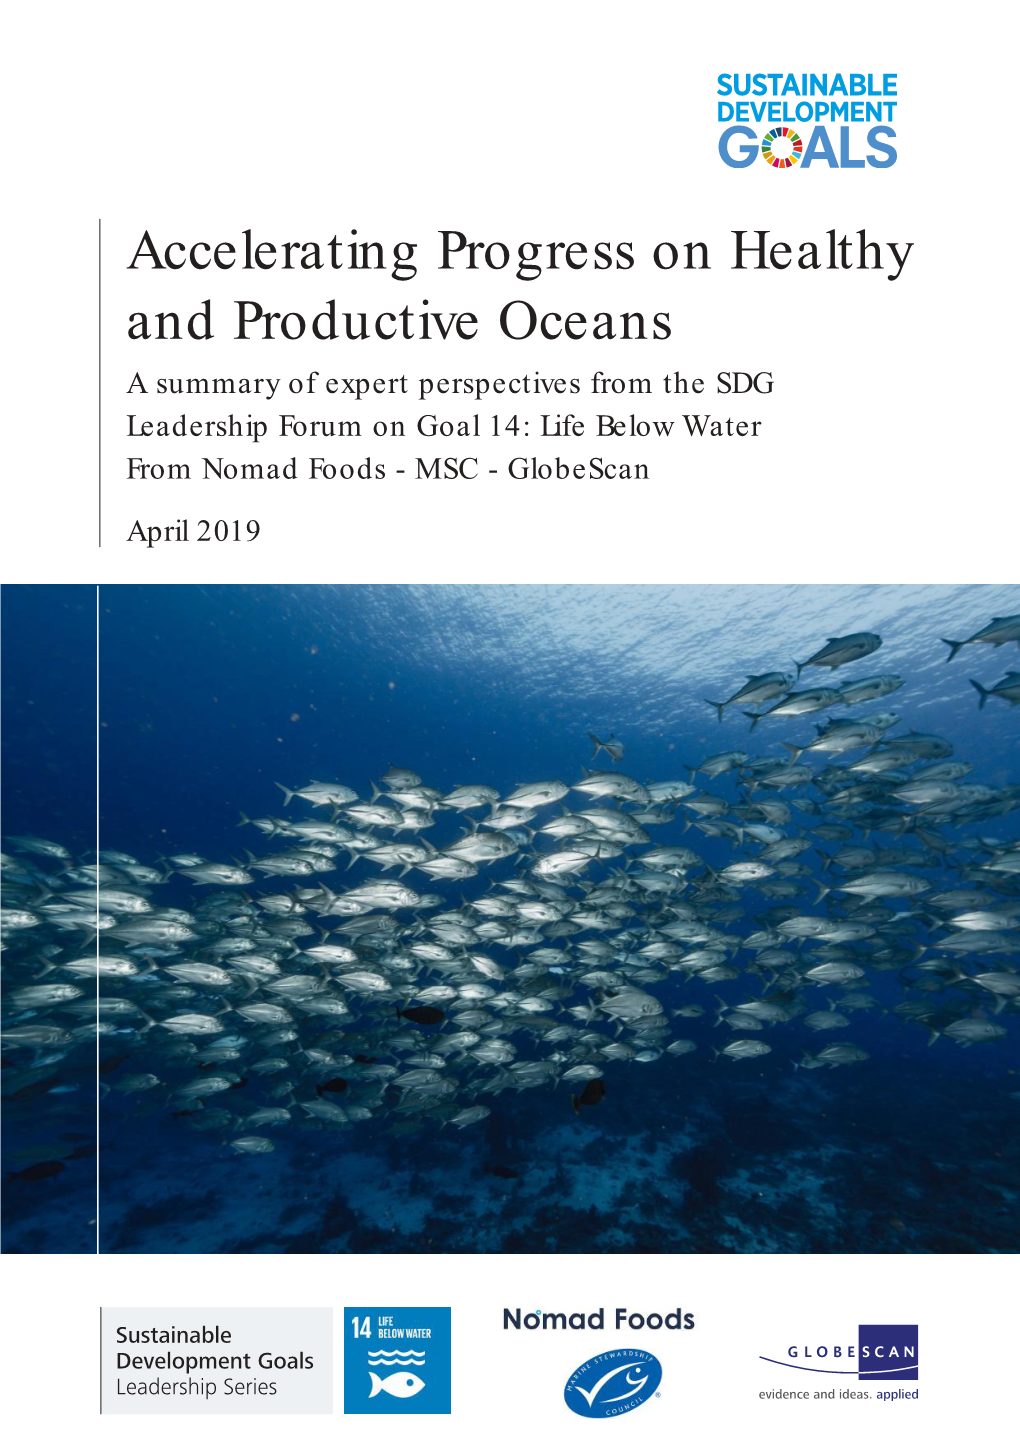 Accelerating Progress on Healthy and Productive Oceans